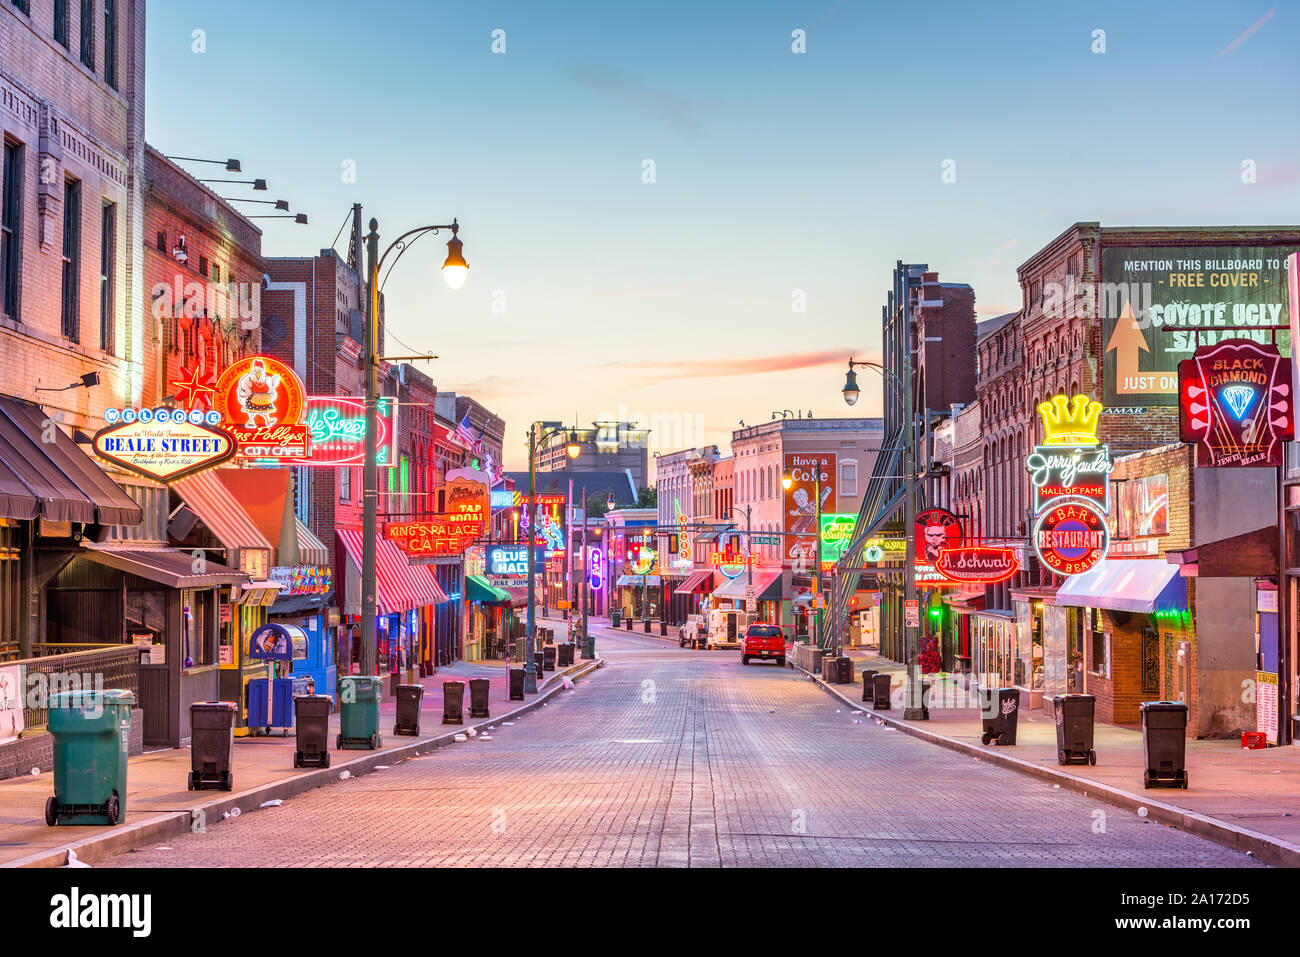 MEMPHIS, TENNESSEE - AUGUST 25, 2017: Blues Clubs on Beale Street at dawn. Stock Photo